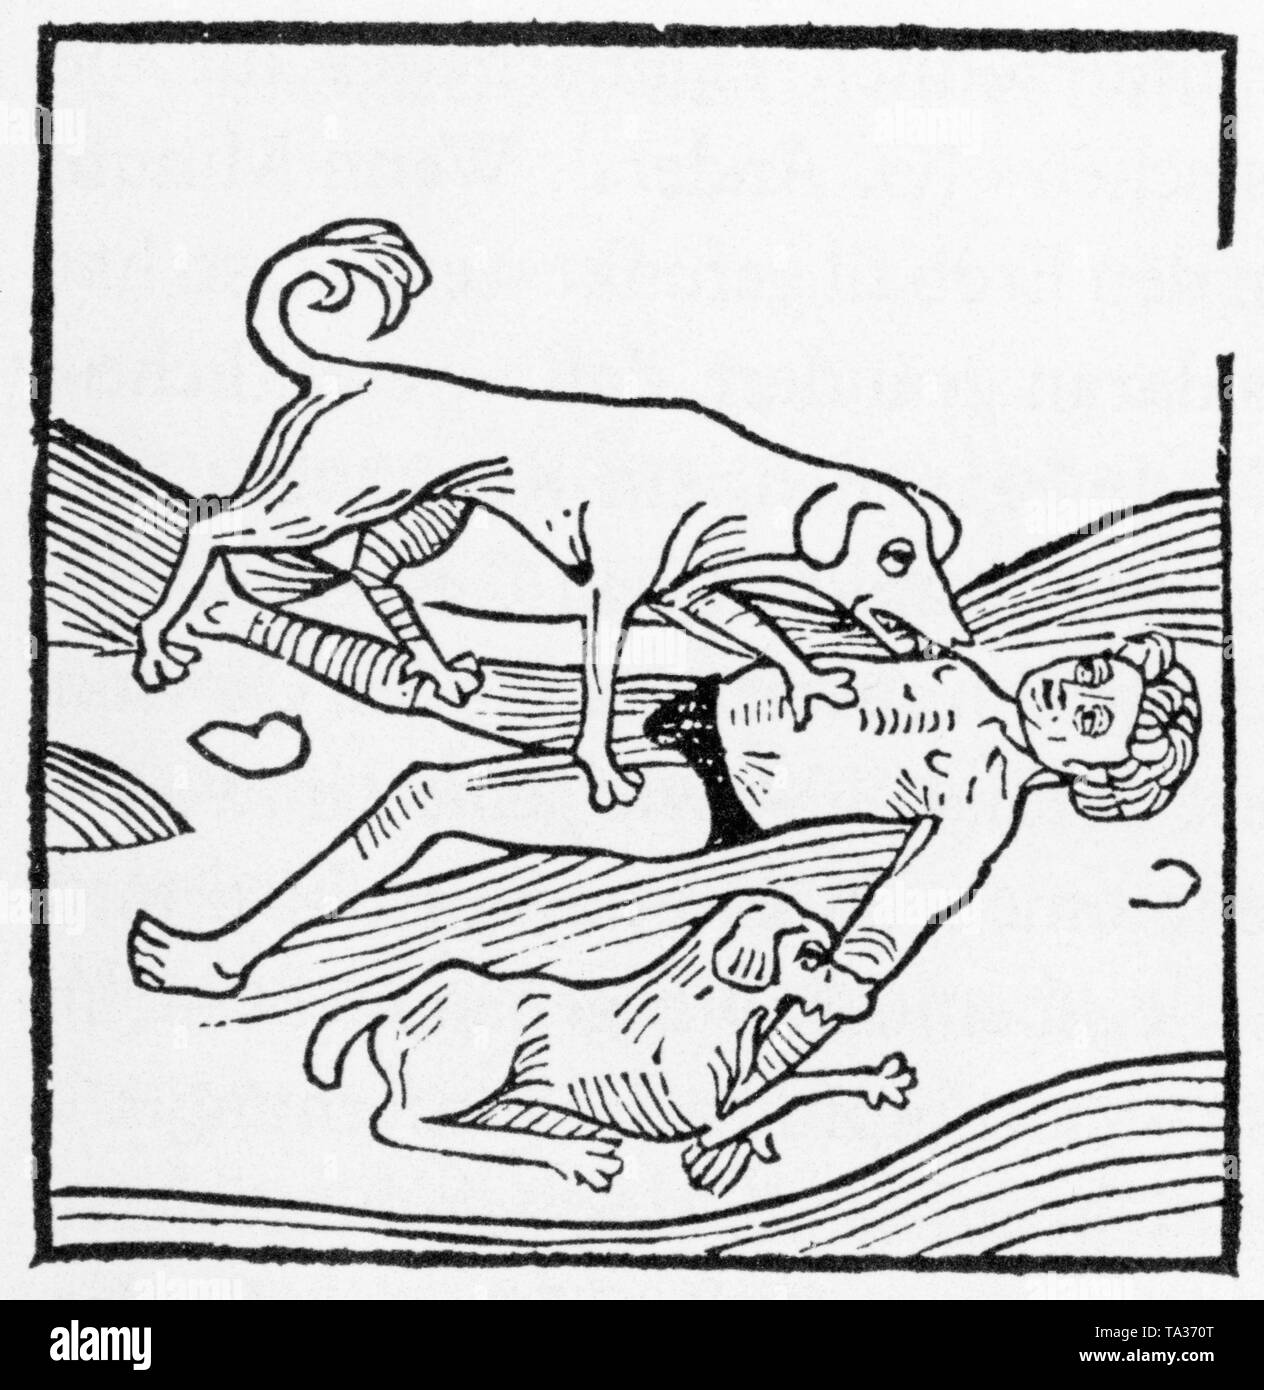 A traveler was robbed and killed. His body is eaten by wild dogs. The illustration is by Johannes de Montevilla and was printed by Bernhard Richel in Basel. Stock Photo